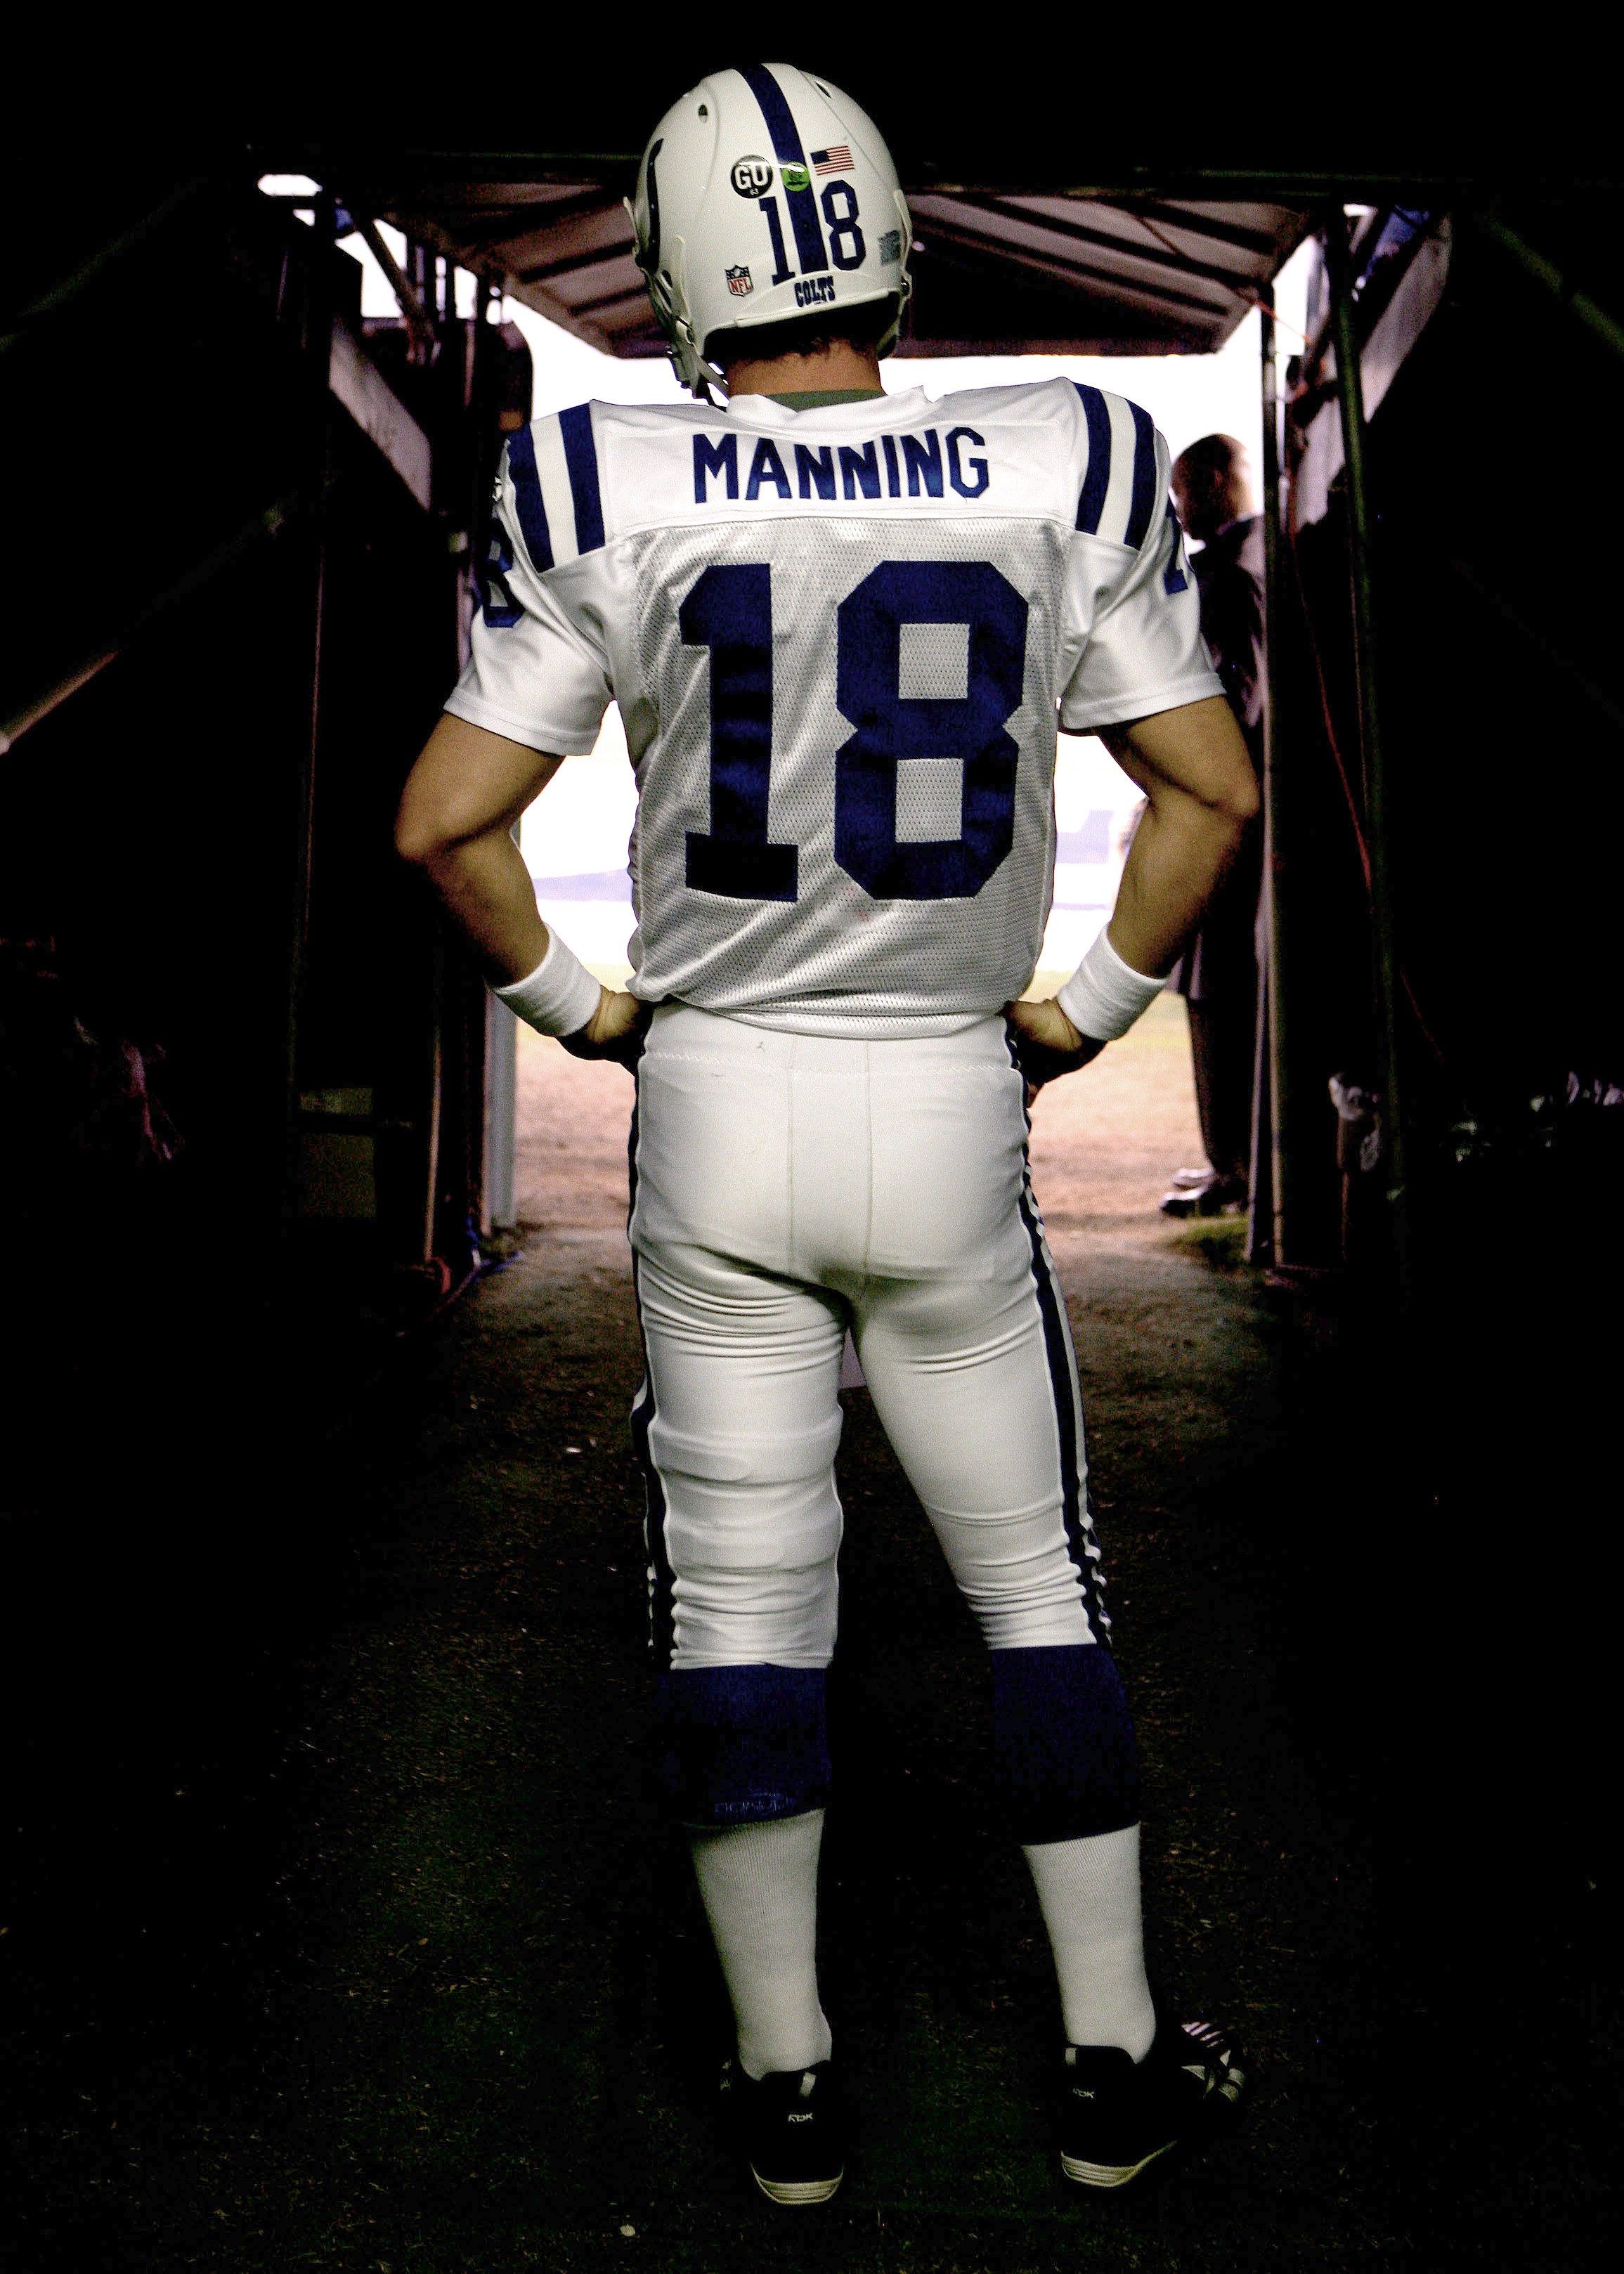 SAN DIEGO, CA - NOVEMBER 23:   Quarterback Peyton Manning #18 of the Indianapolis Colts prepares to enter the game against the San Diego Chargers during their NFL Game at Qualcomm Stadium on November 23, 2008 in San Diego, California. (Photo by Donald Miralle/Getty Images)